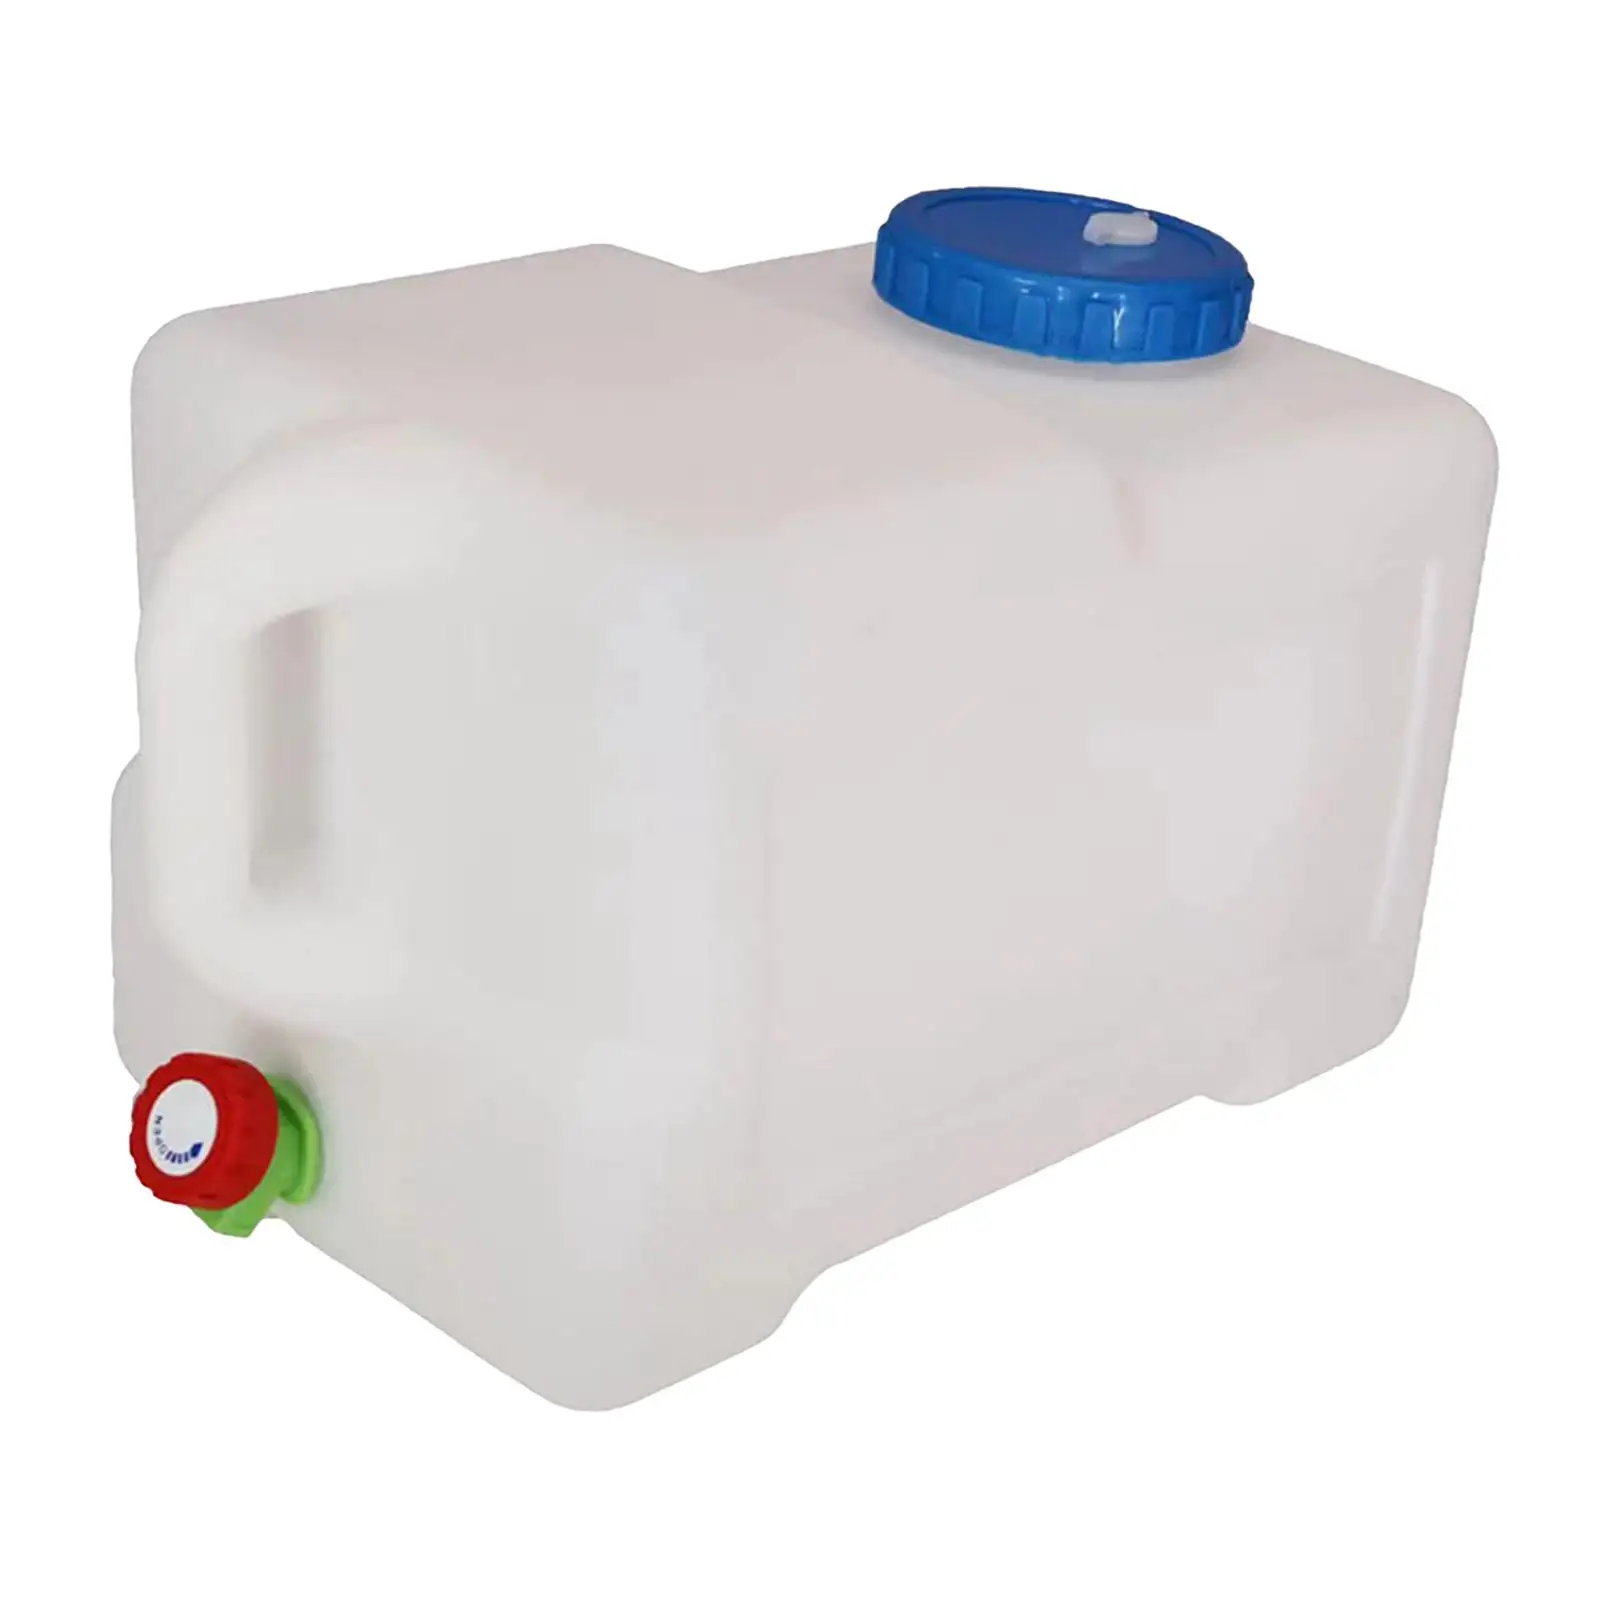 Water Container Portable Water Storage Carrier for Picnics Driving Fishing